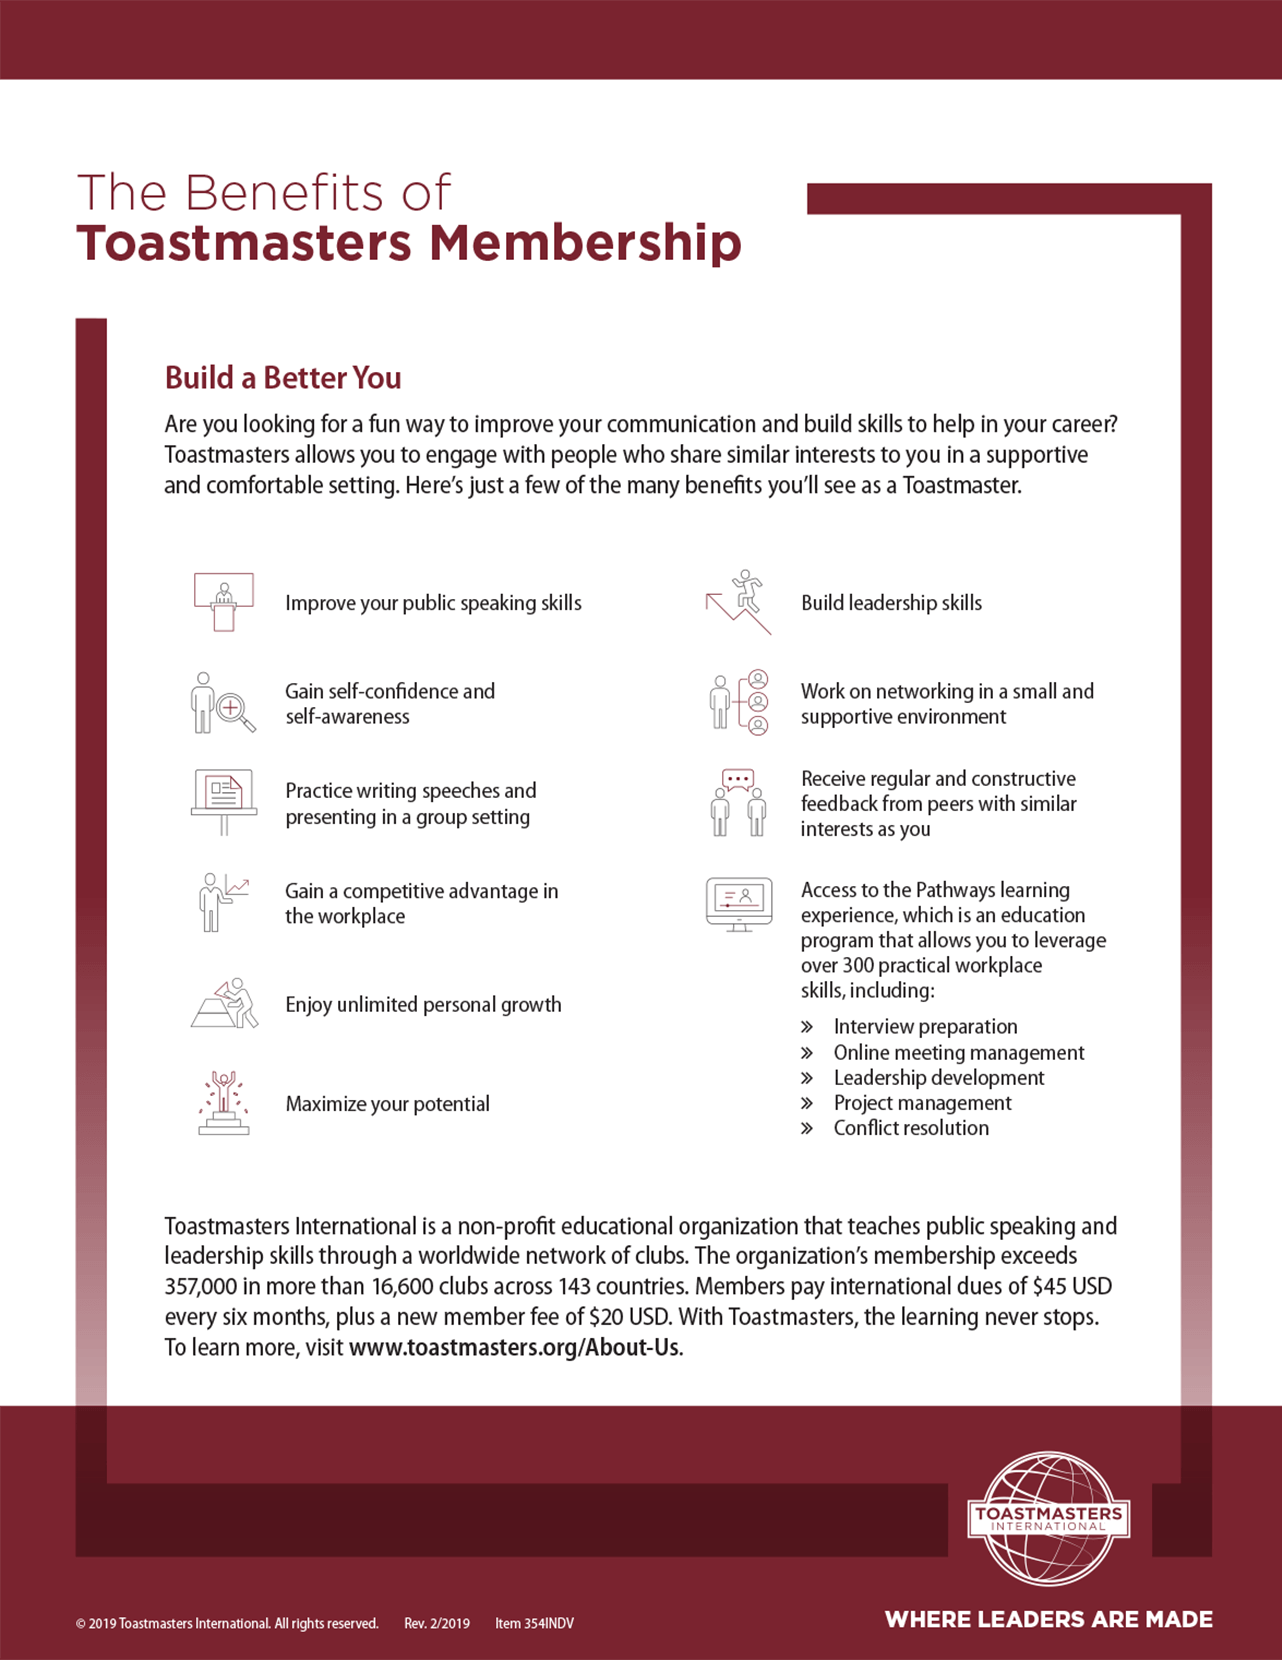 The Benefits of Toastmasters Membership (set of 25)